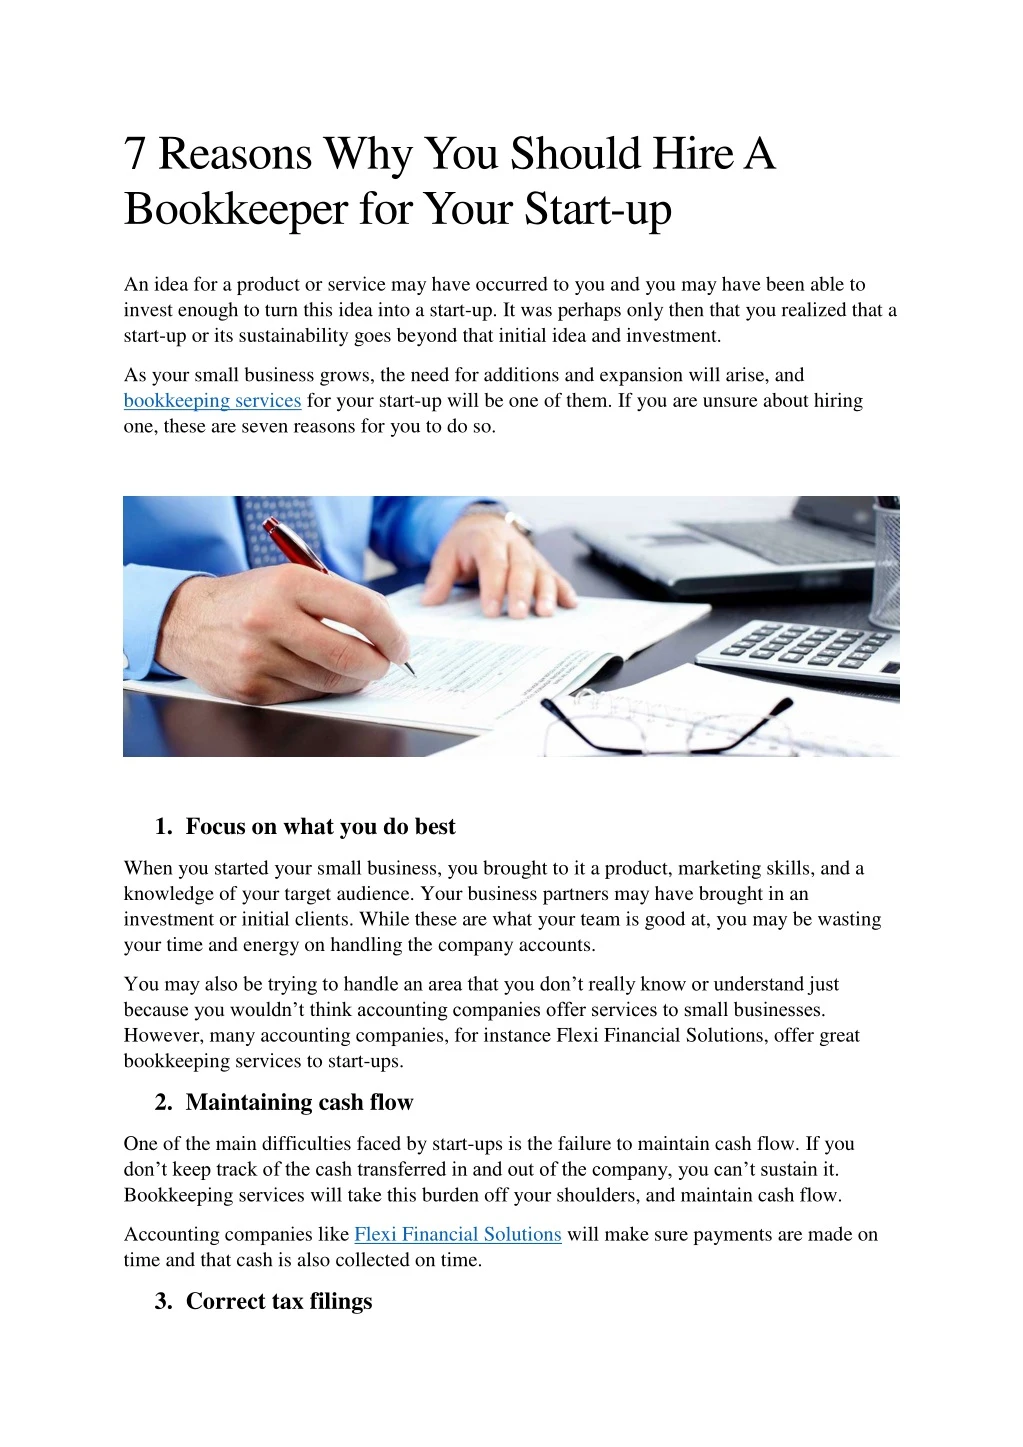 7 reasons why you should hire a bookkeeper